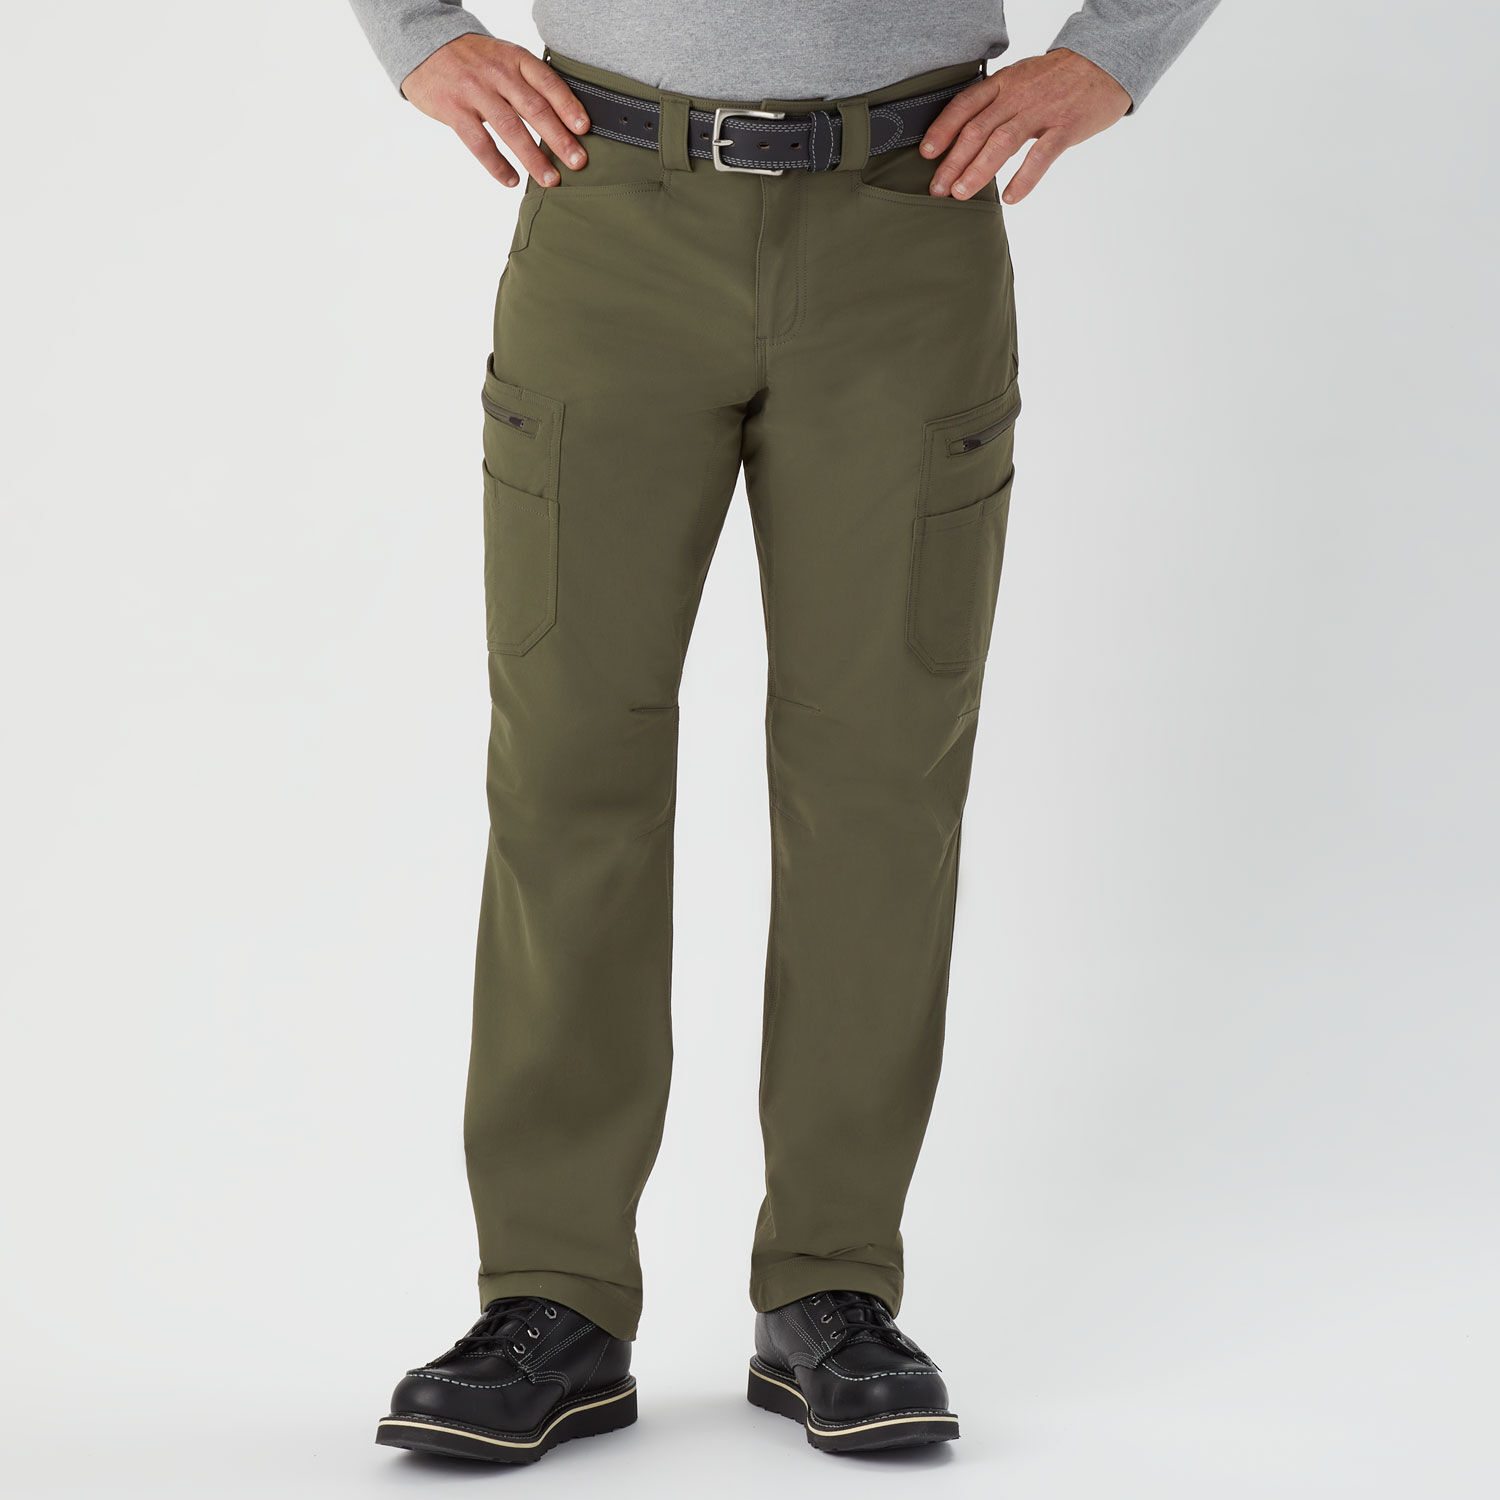 Men's Flexpedition Packrat Pants | Duluth Trading Company